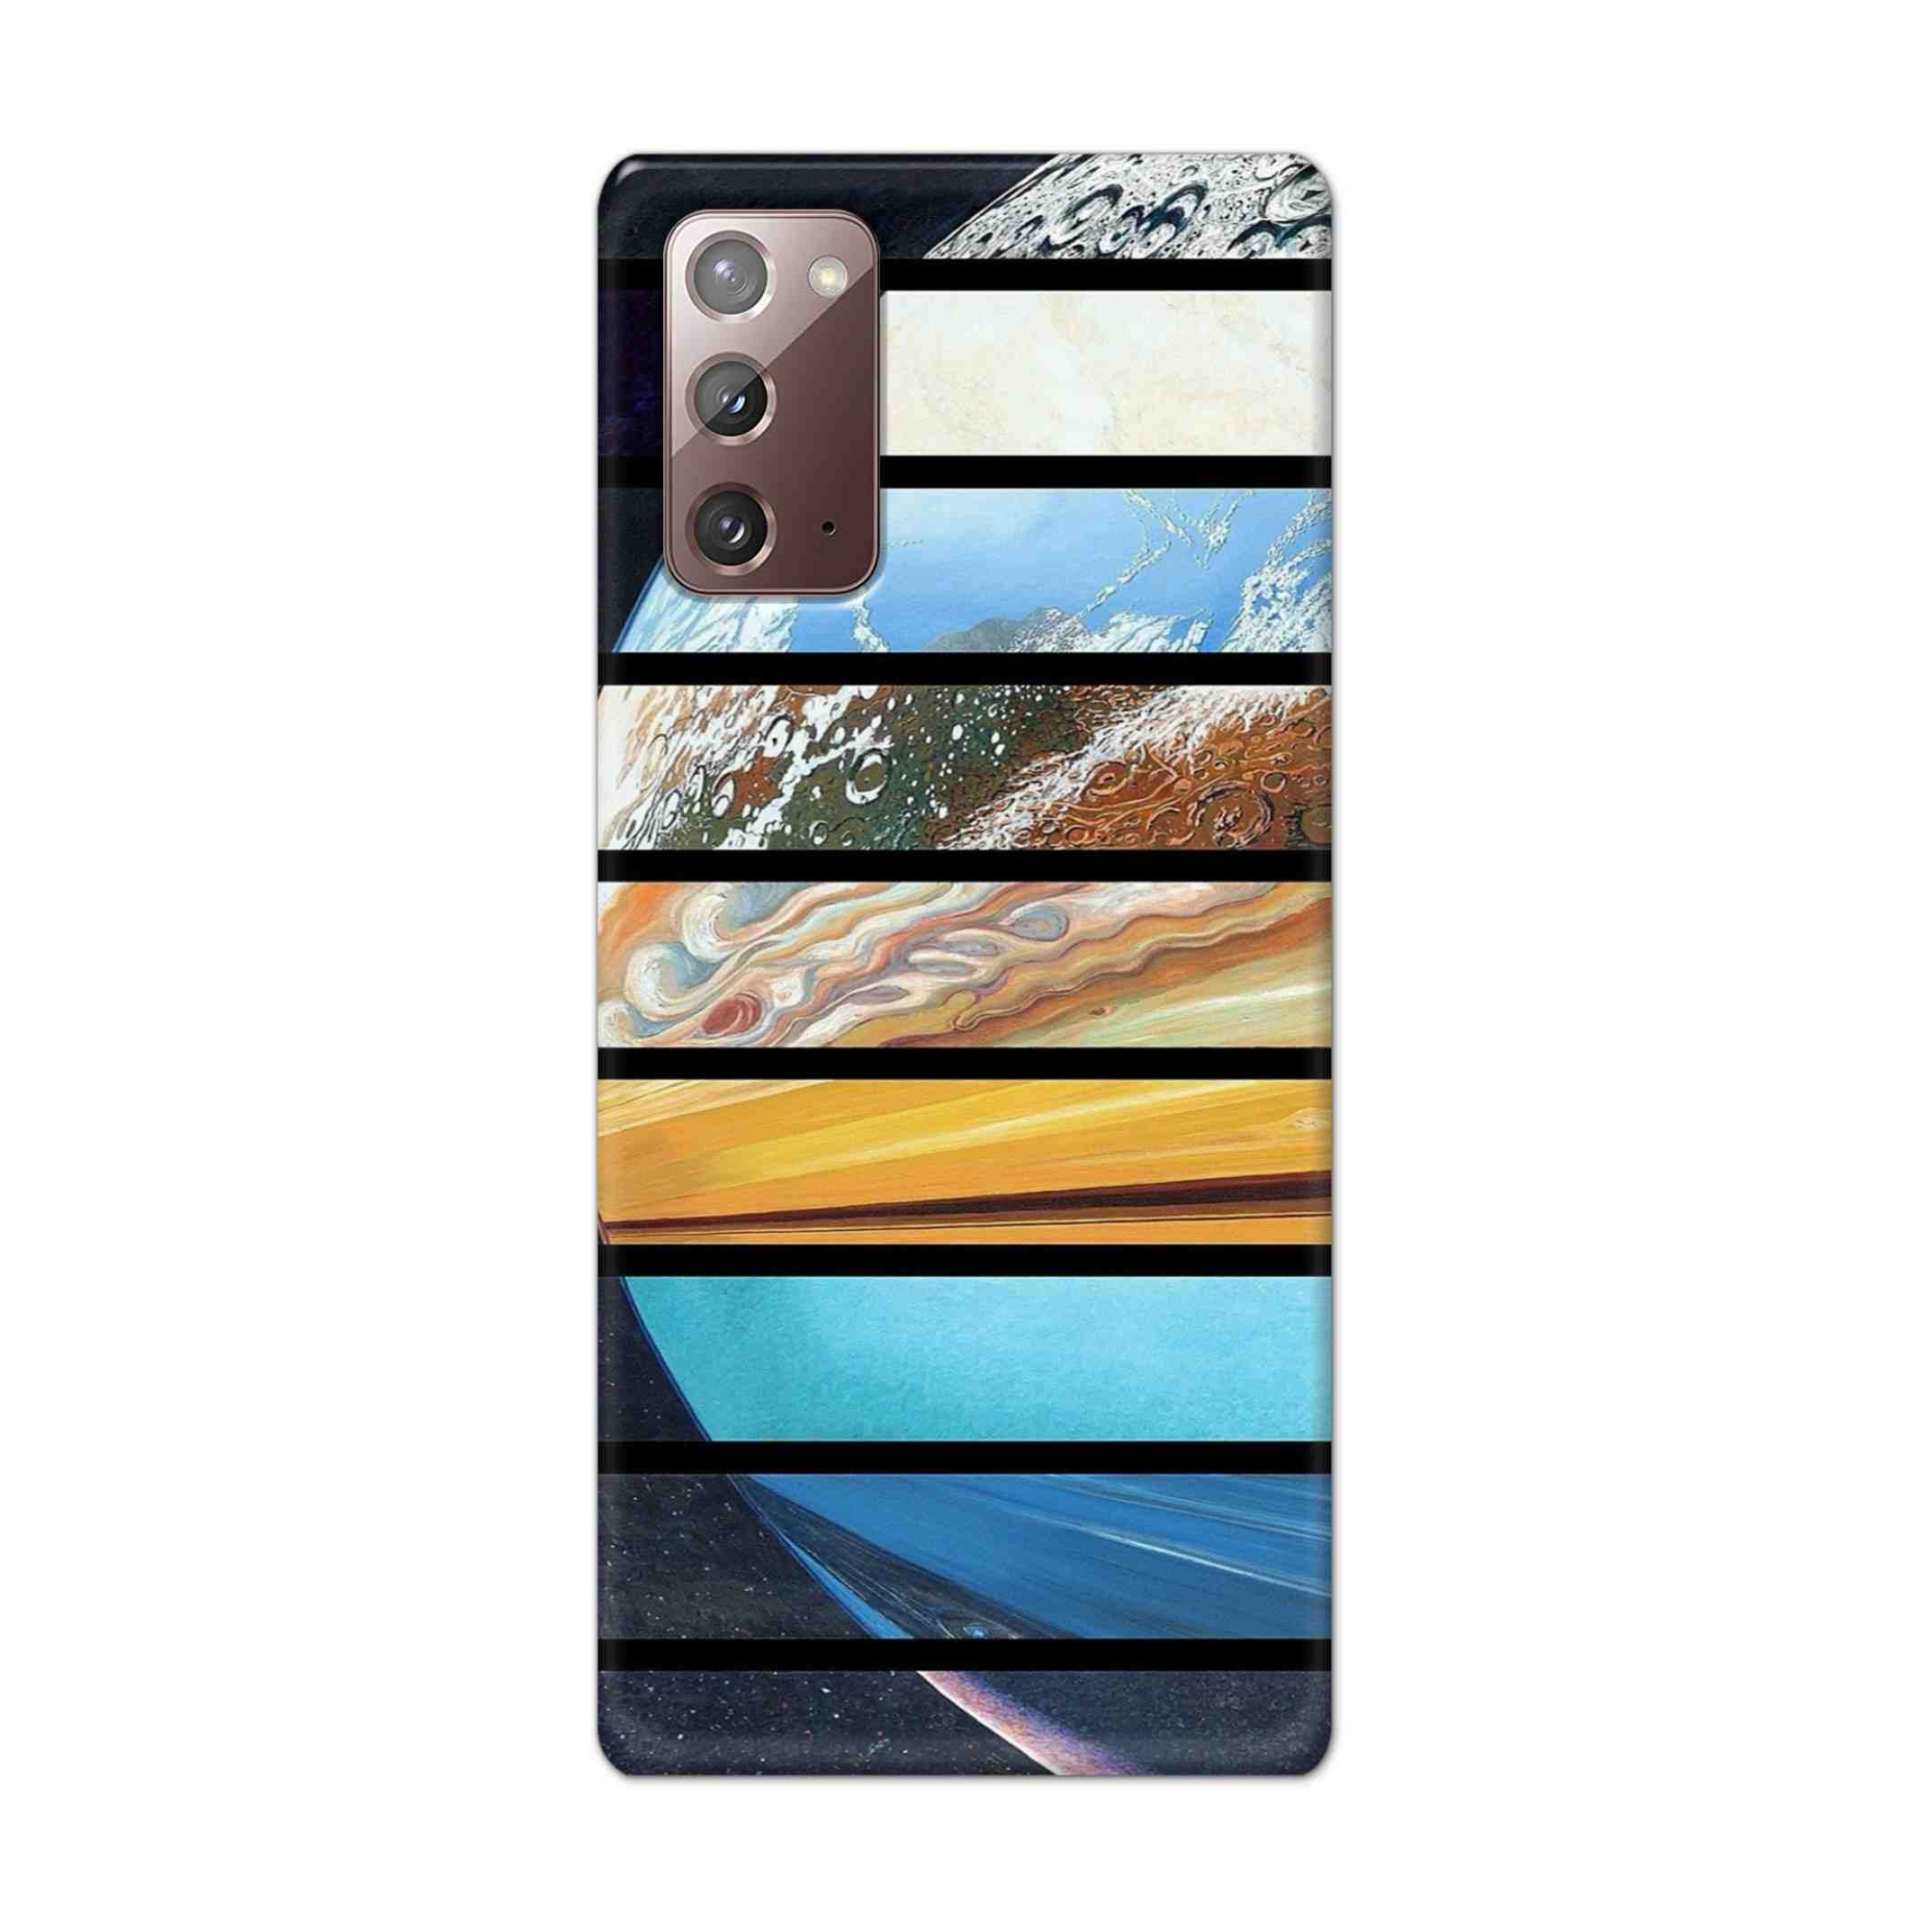 Buy Colourful Earth Hard Back Mobile Phone Case Cover For Samsung Galaxy Note 20 Online